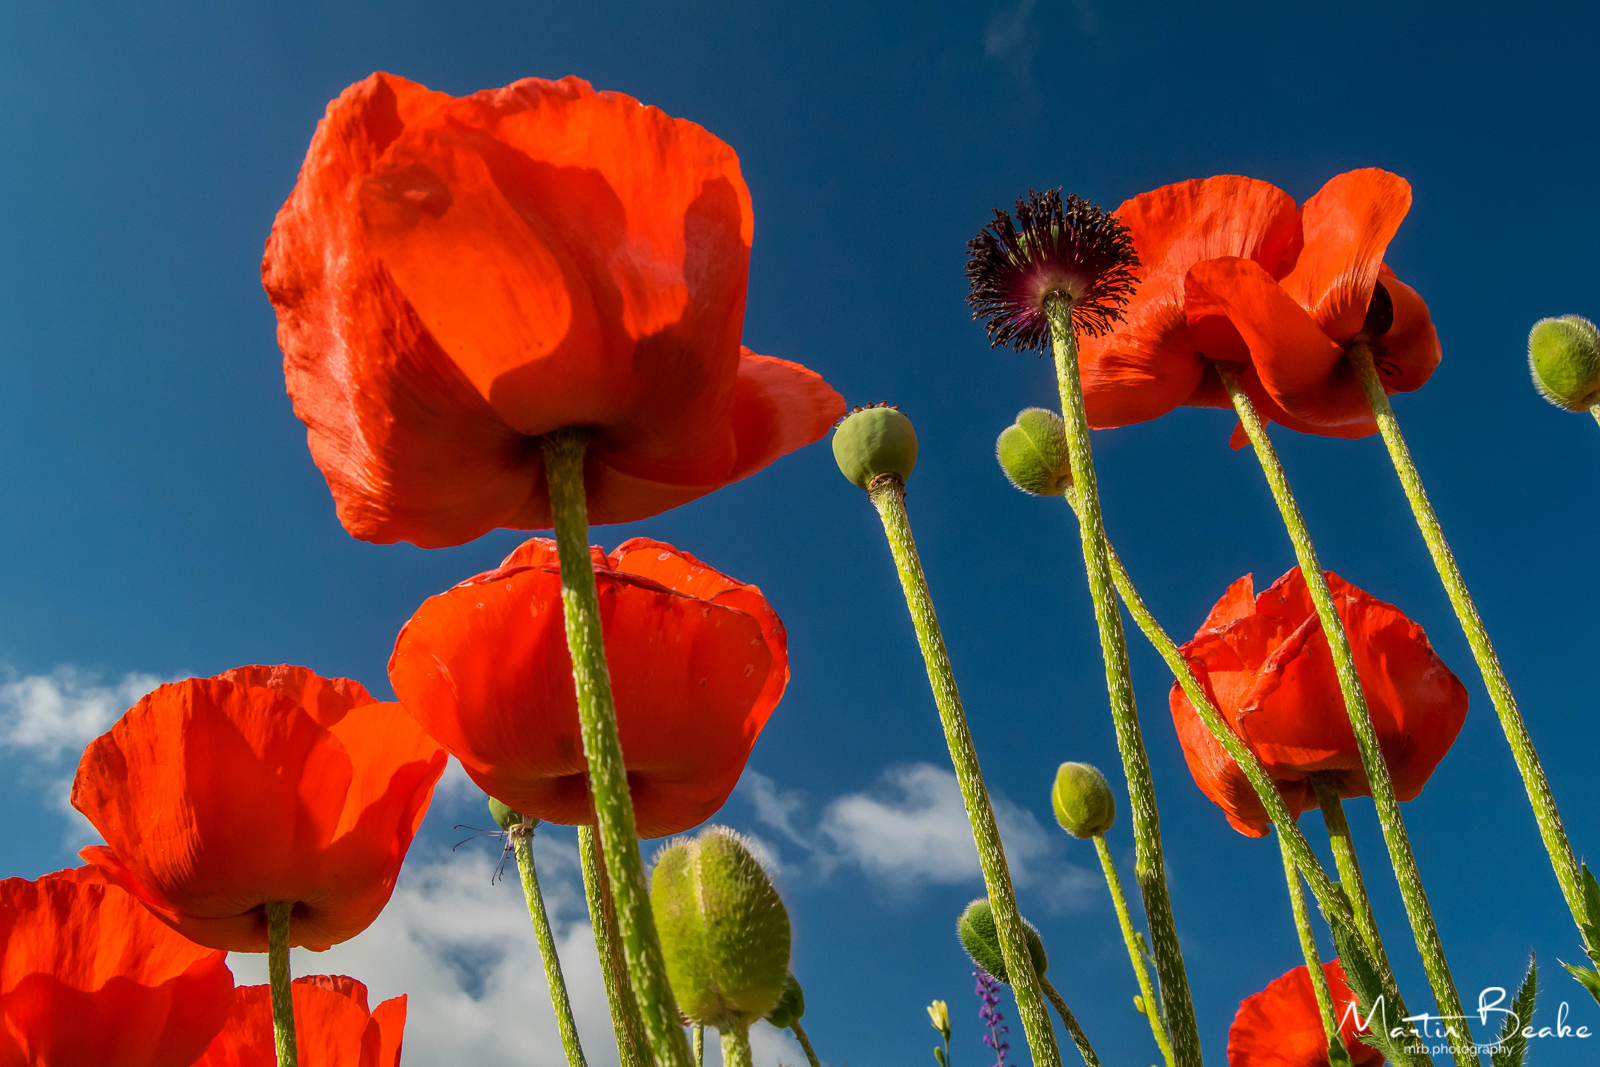 Poppies reach for the sky